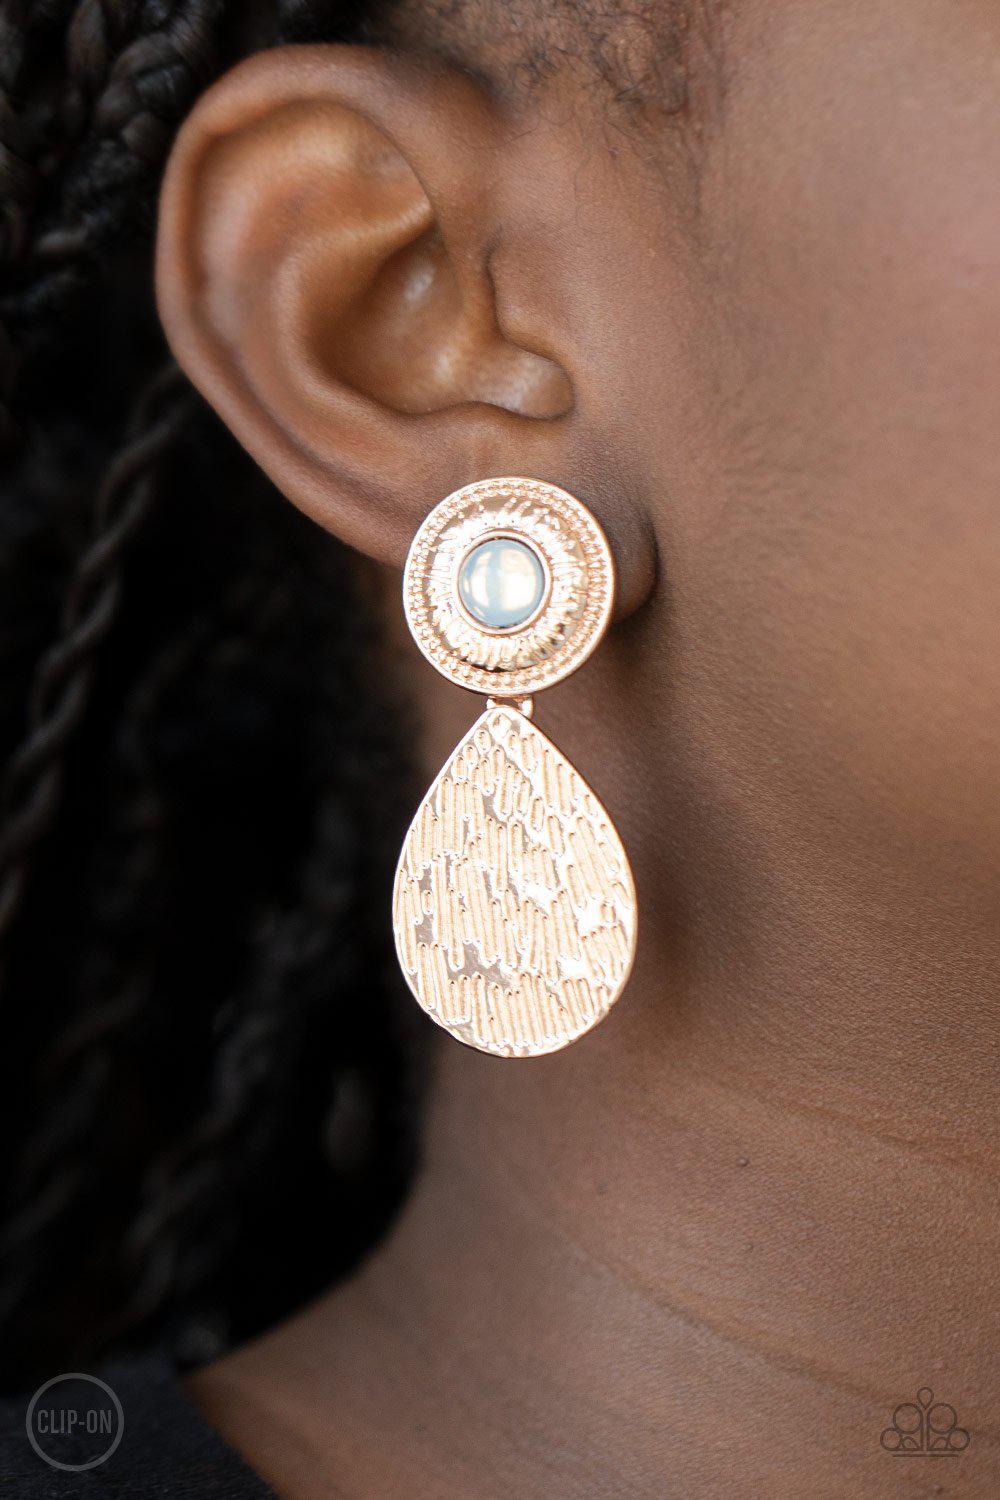 Emblazoned Edge Rose Gold and Opal Clip-On Earrings - Paparazzi Accessories - model -CarasShop.com - $5 Jewelry by Cara Jewels